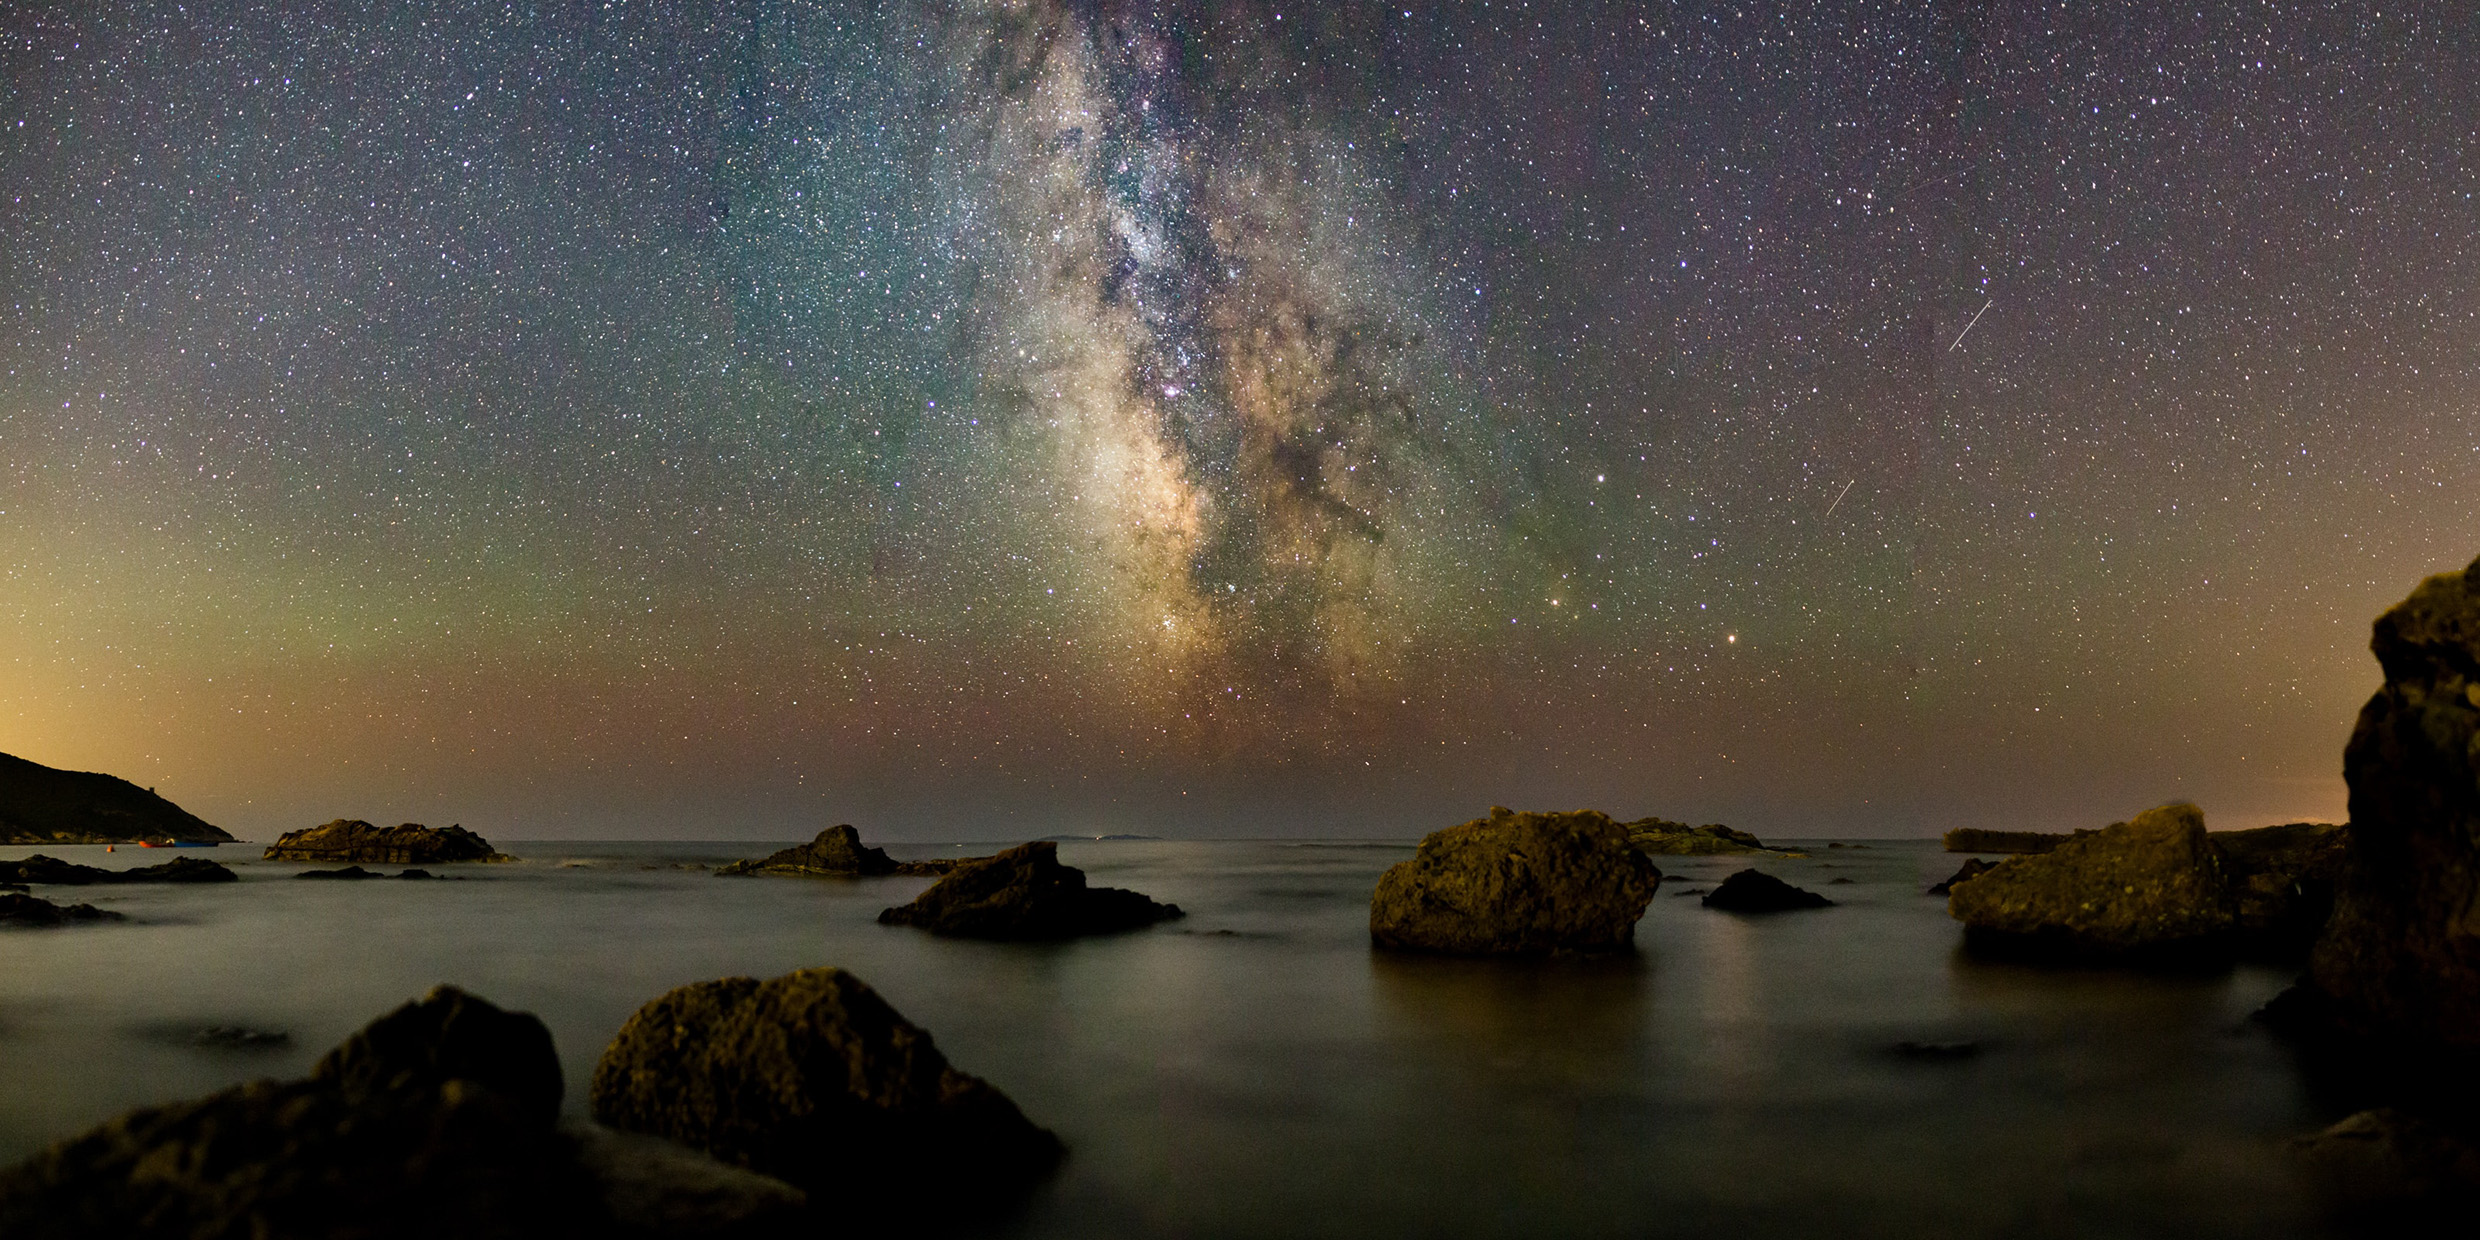 Image of the Milky Way at night